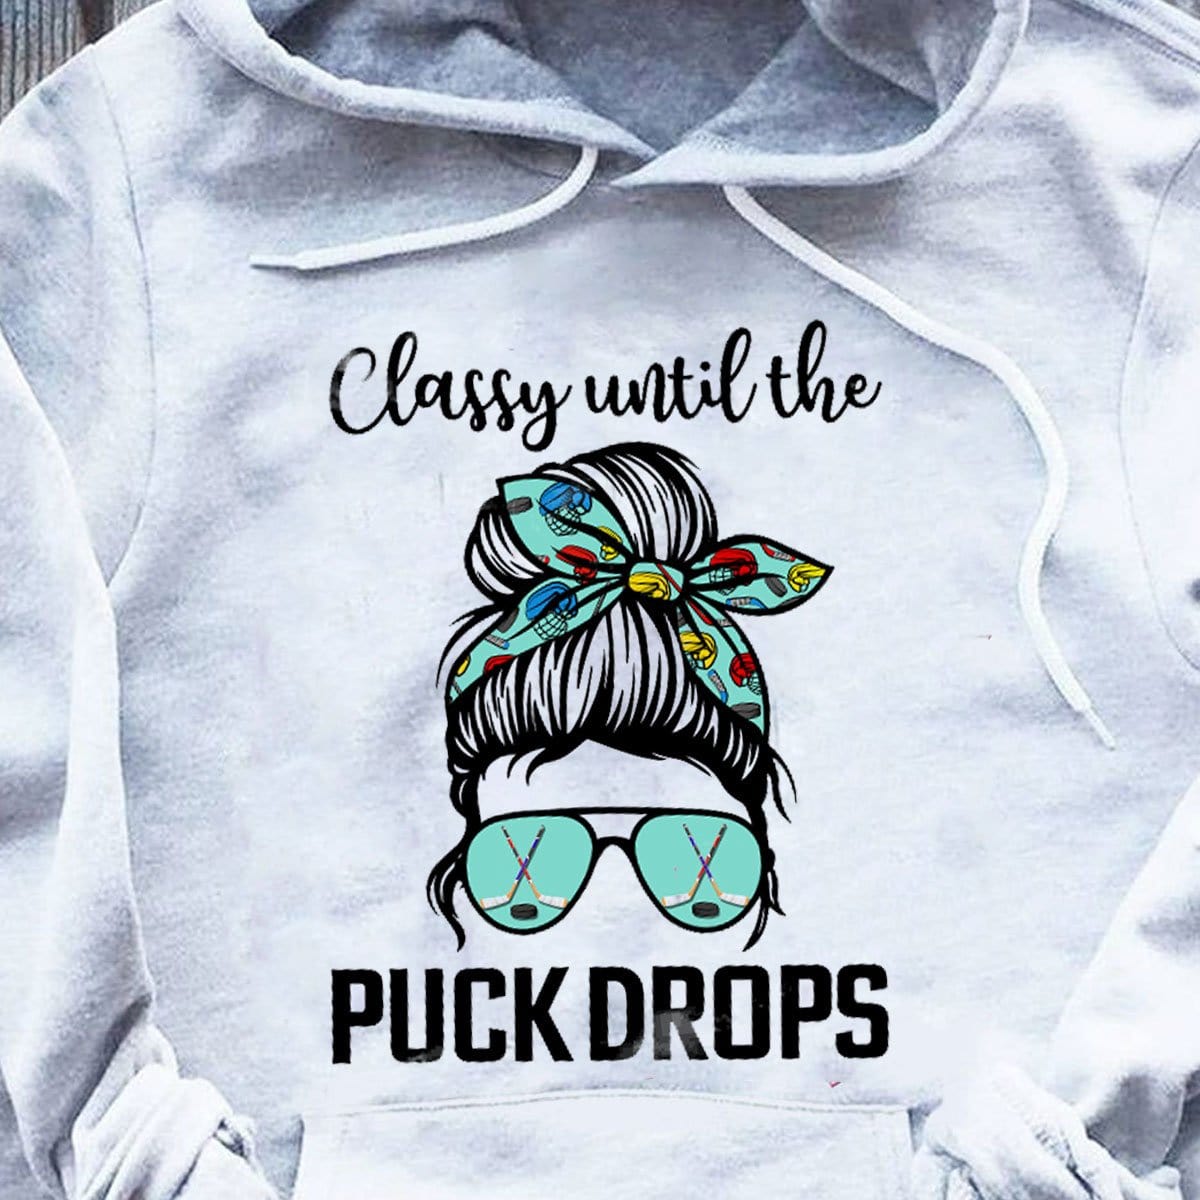 Vintage Hockey Shirts, School Is Important But Hockey Is Importanter, -  Hope Fight